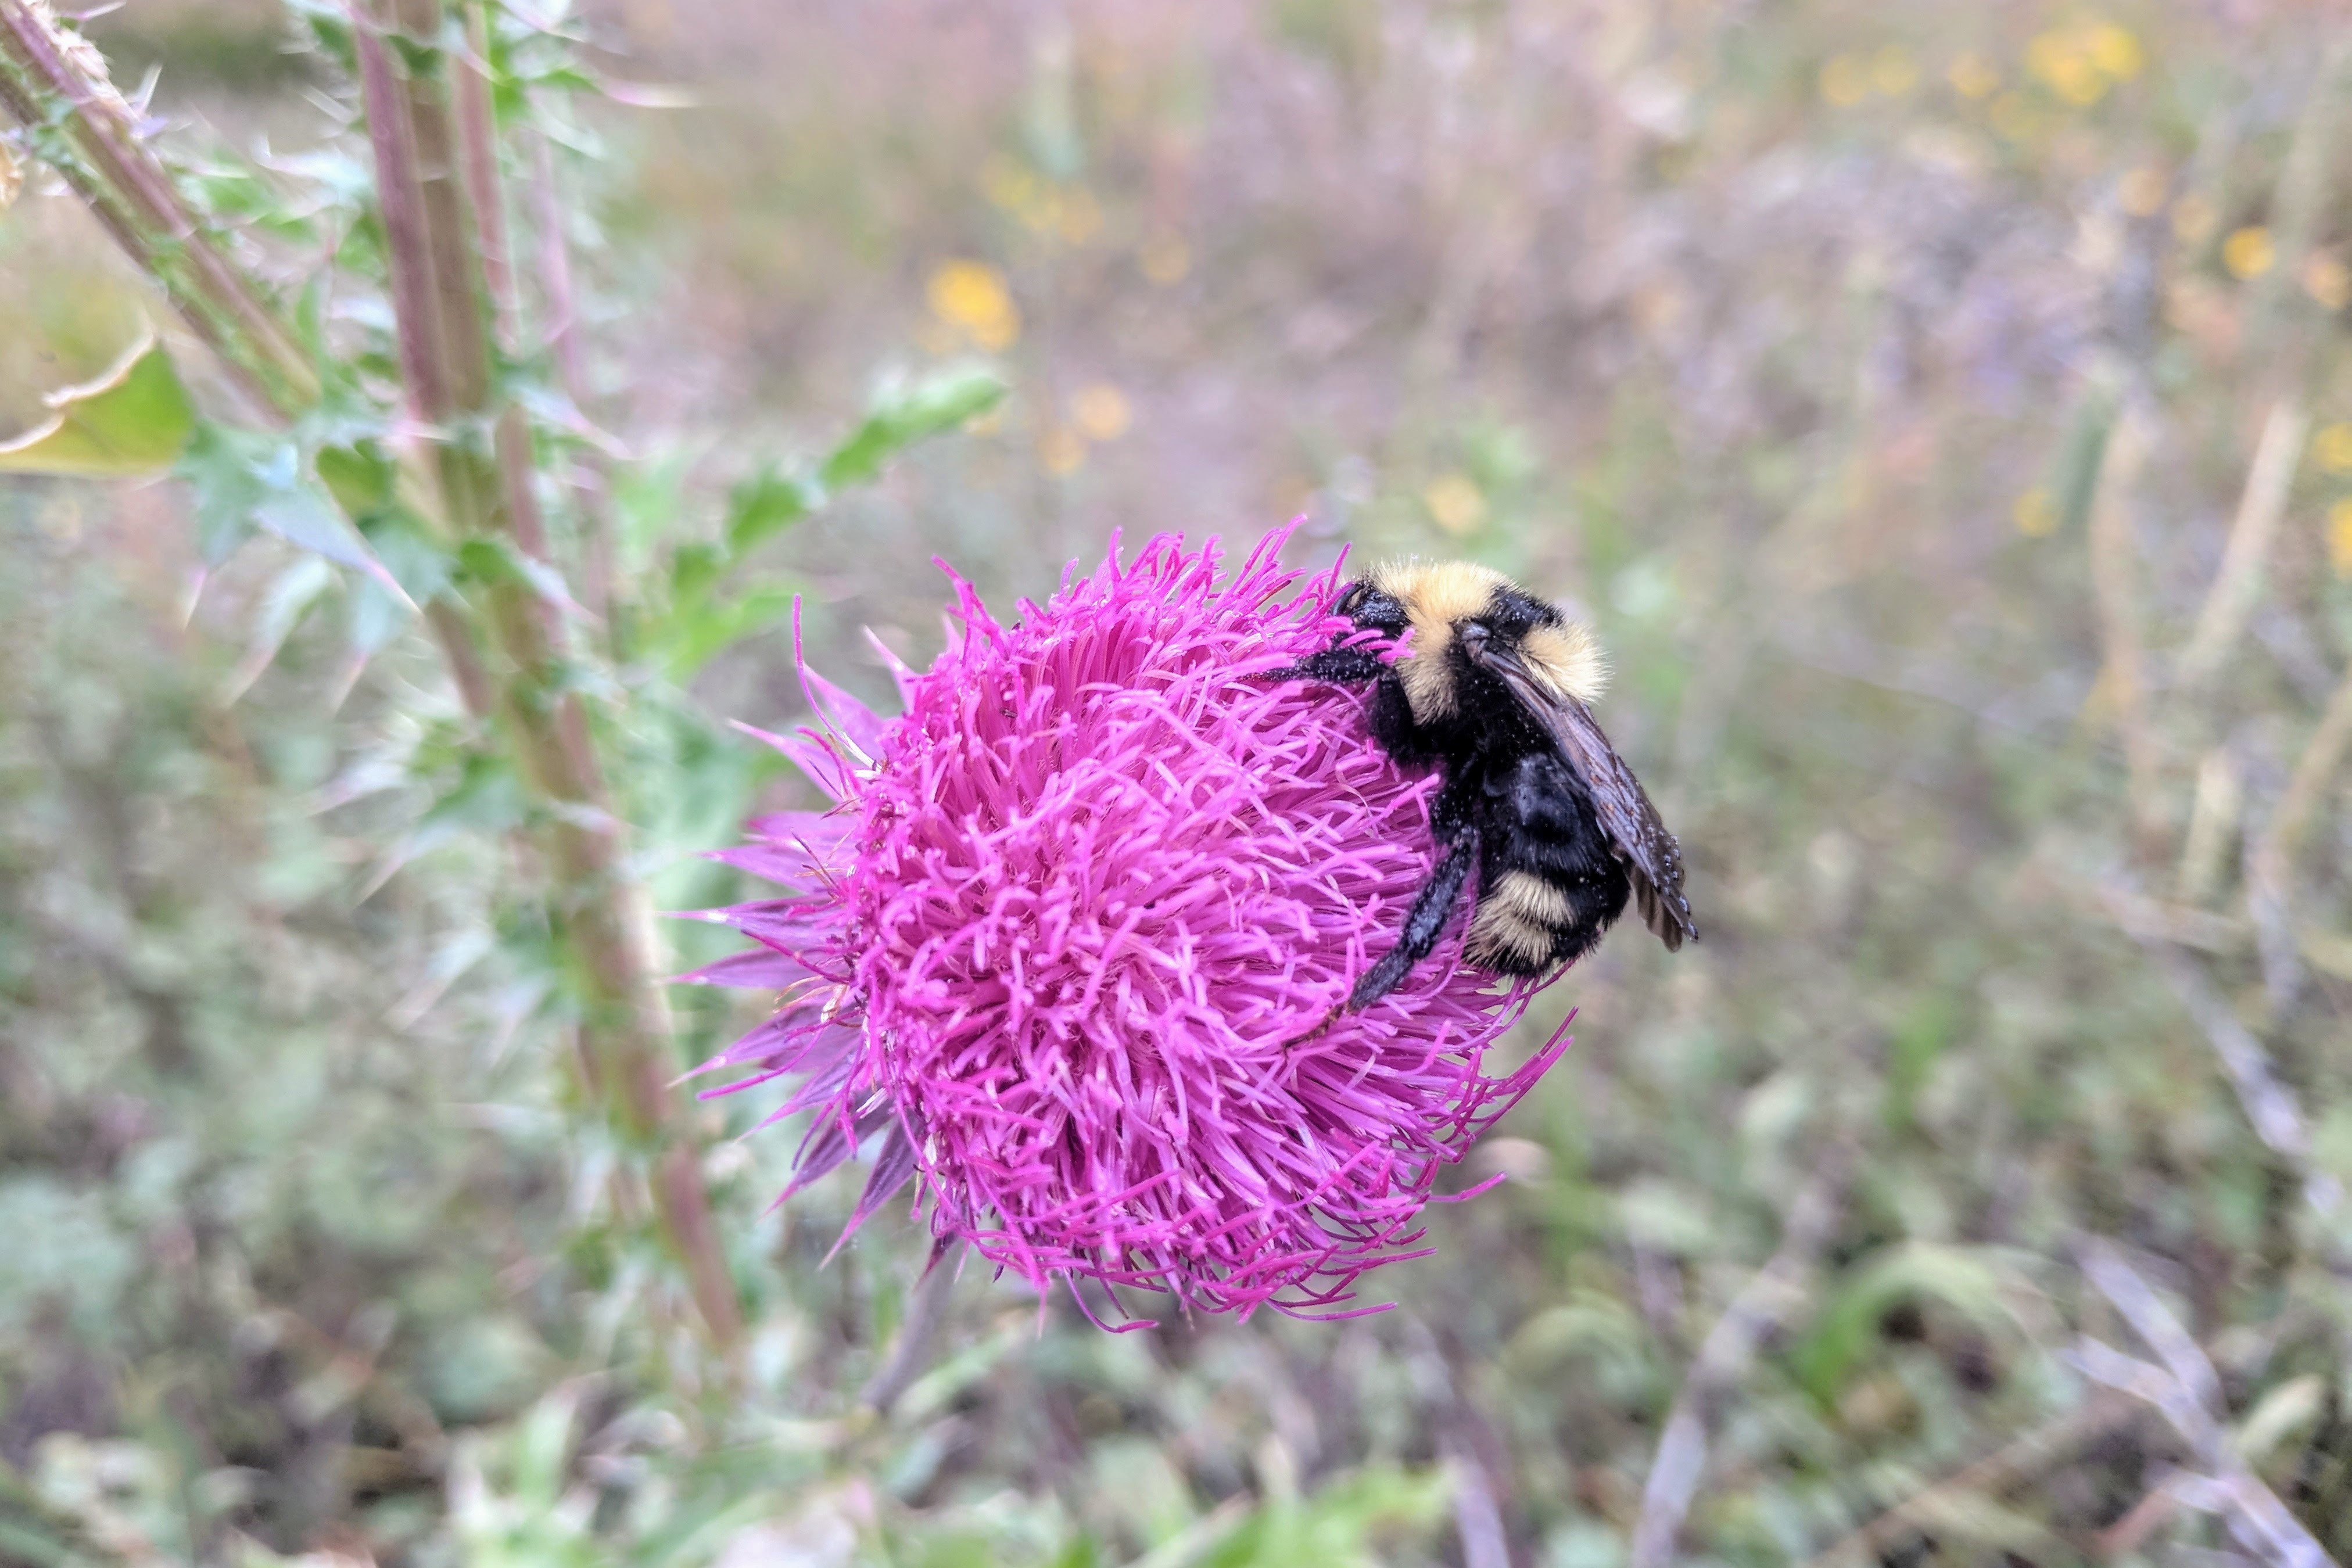 Large bumblebee on a pink thistle bloom